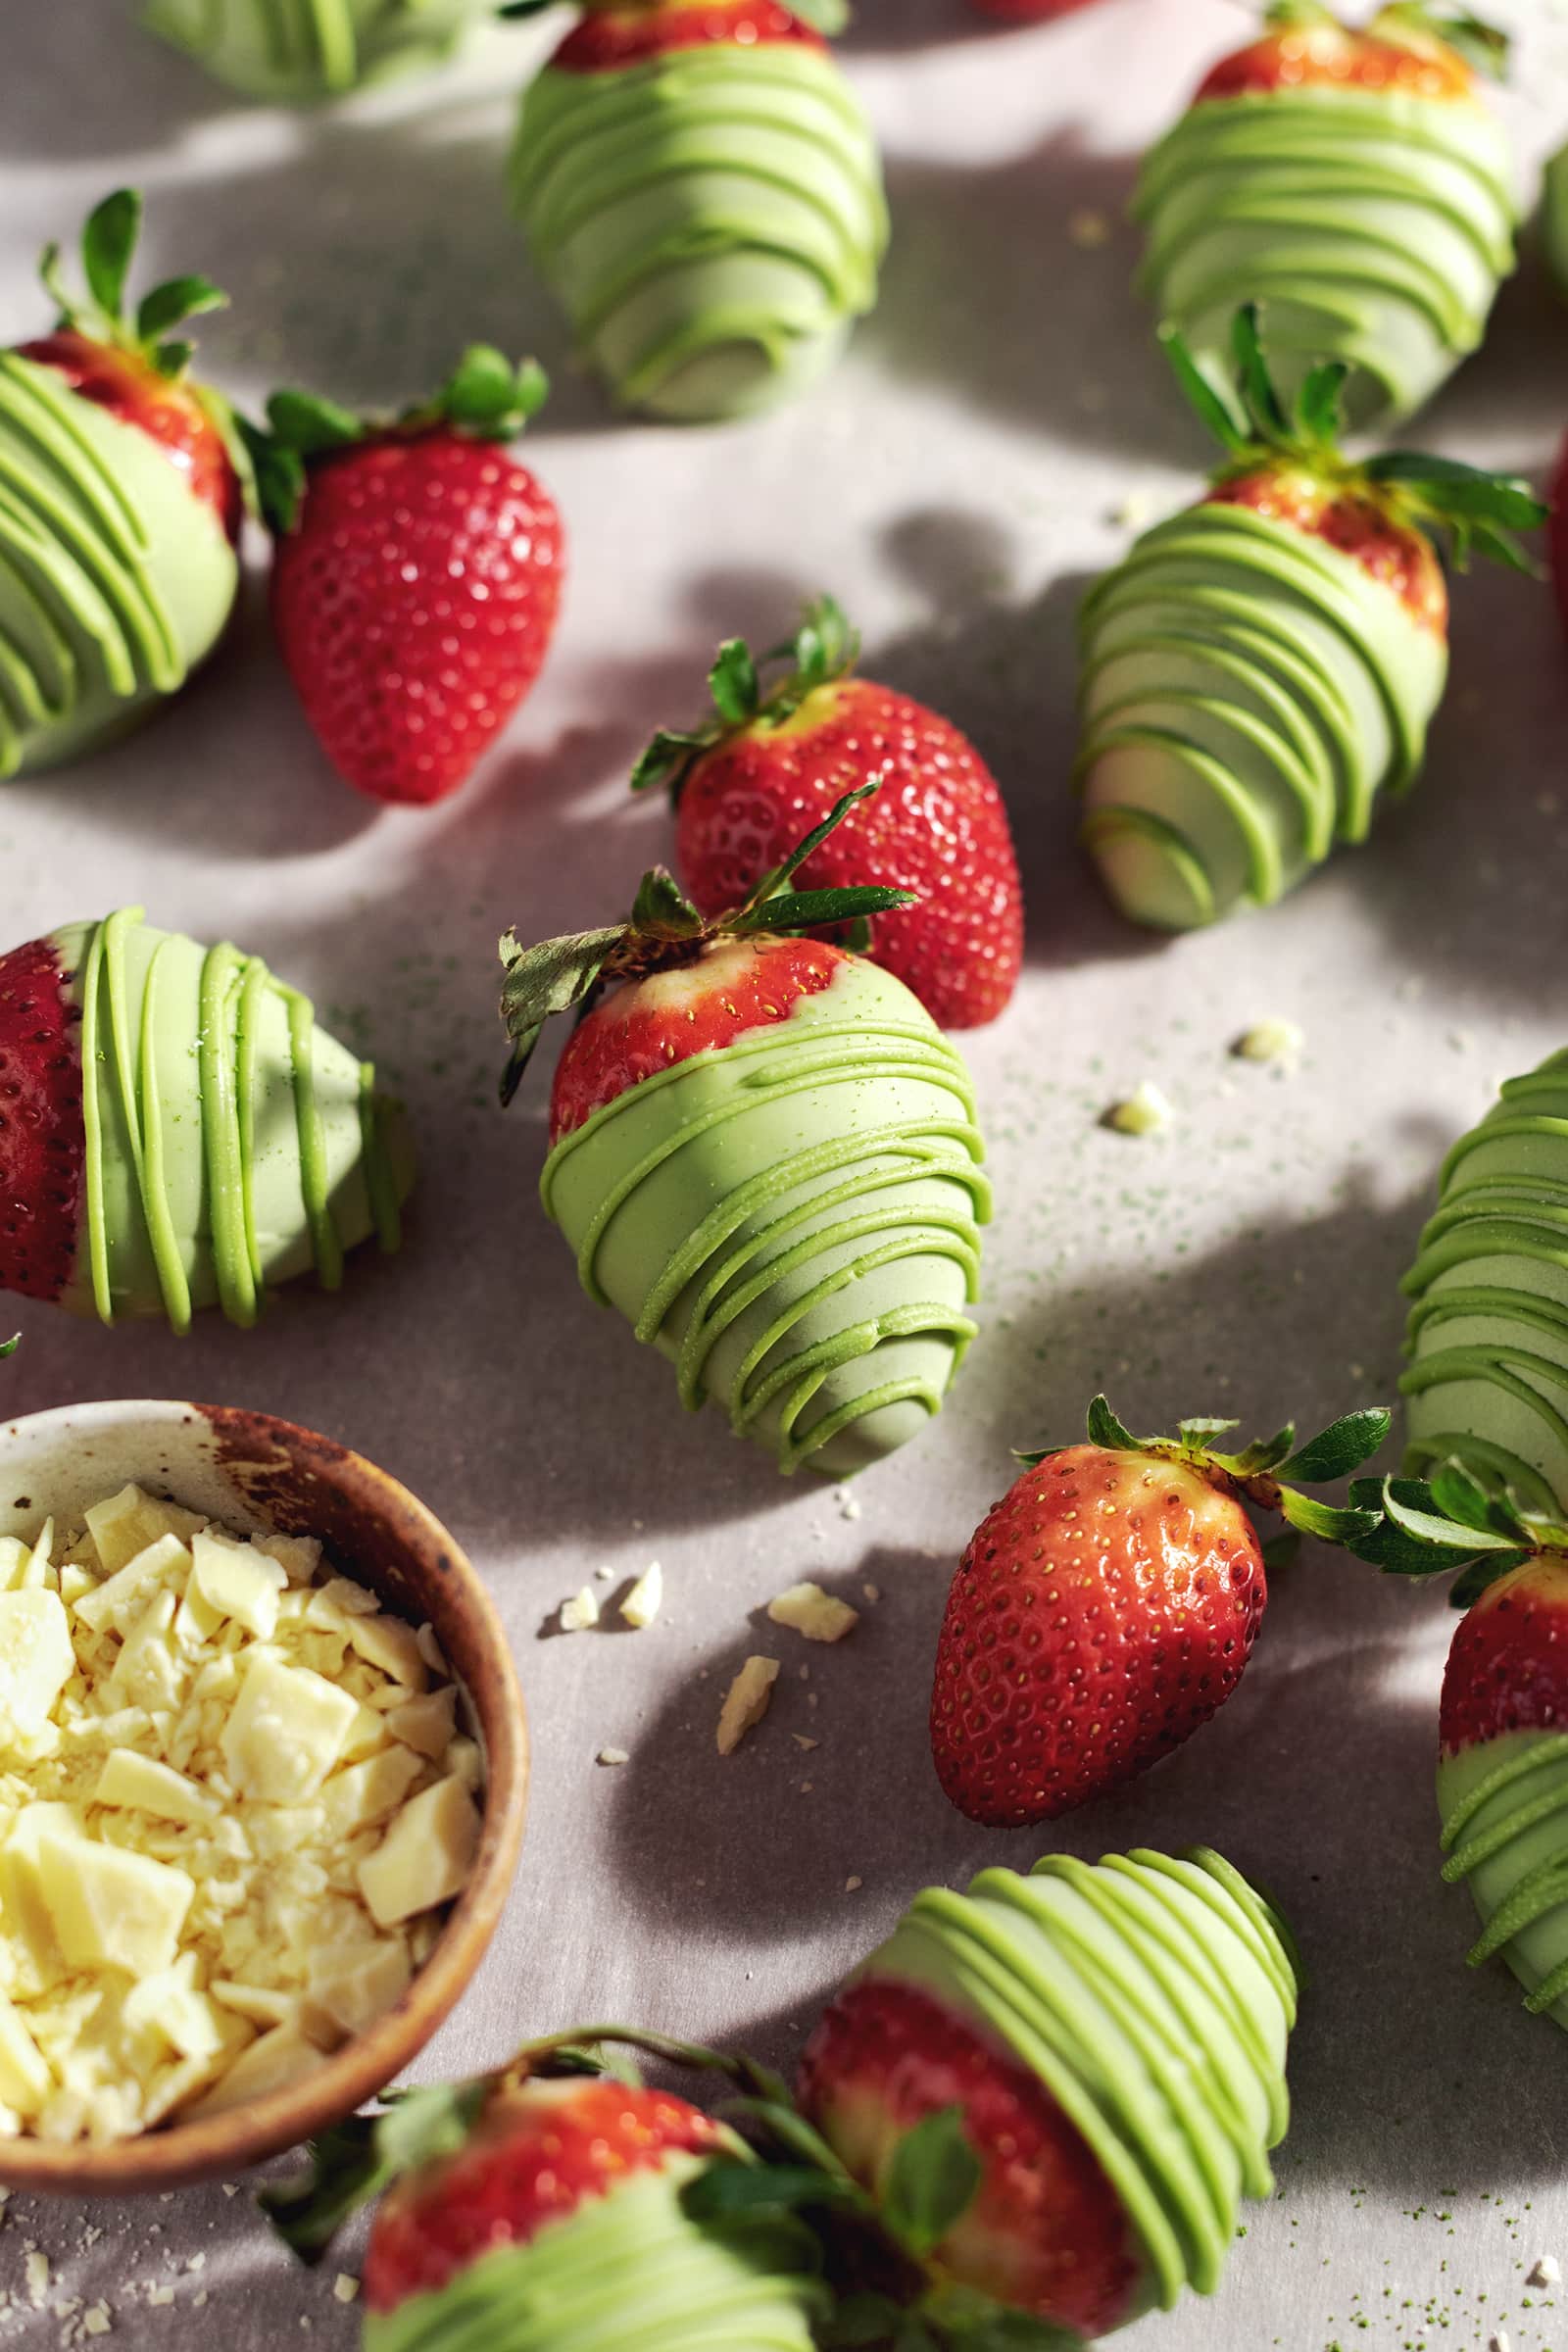 Strawberries dipped in green matcha white chocolate scattered on table with fresh strawberries.